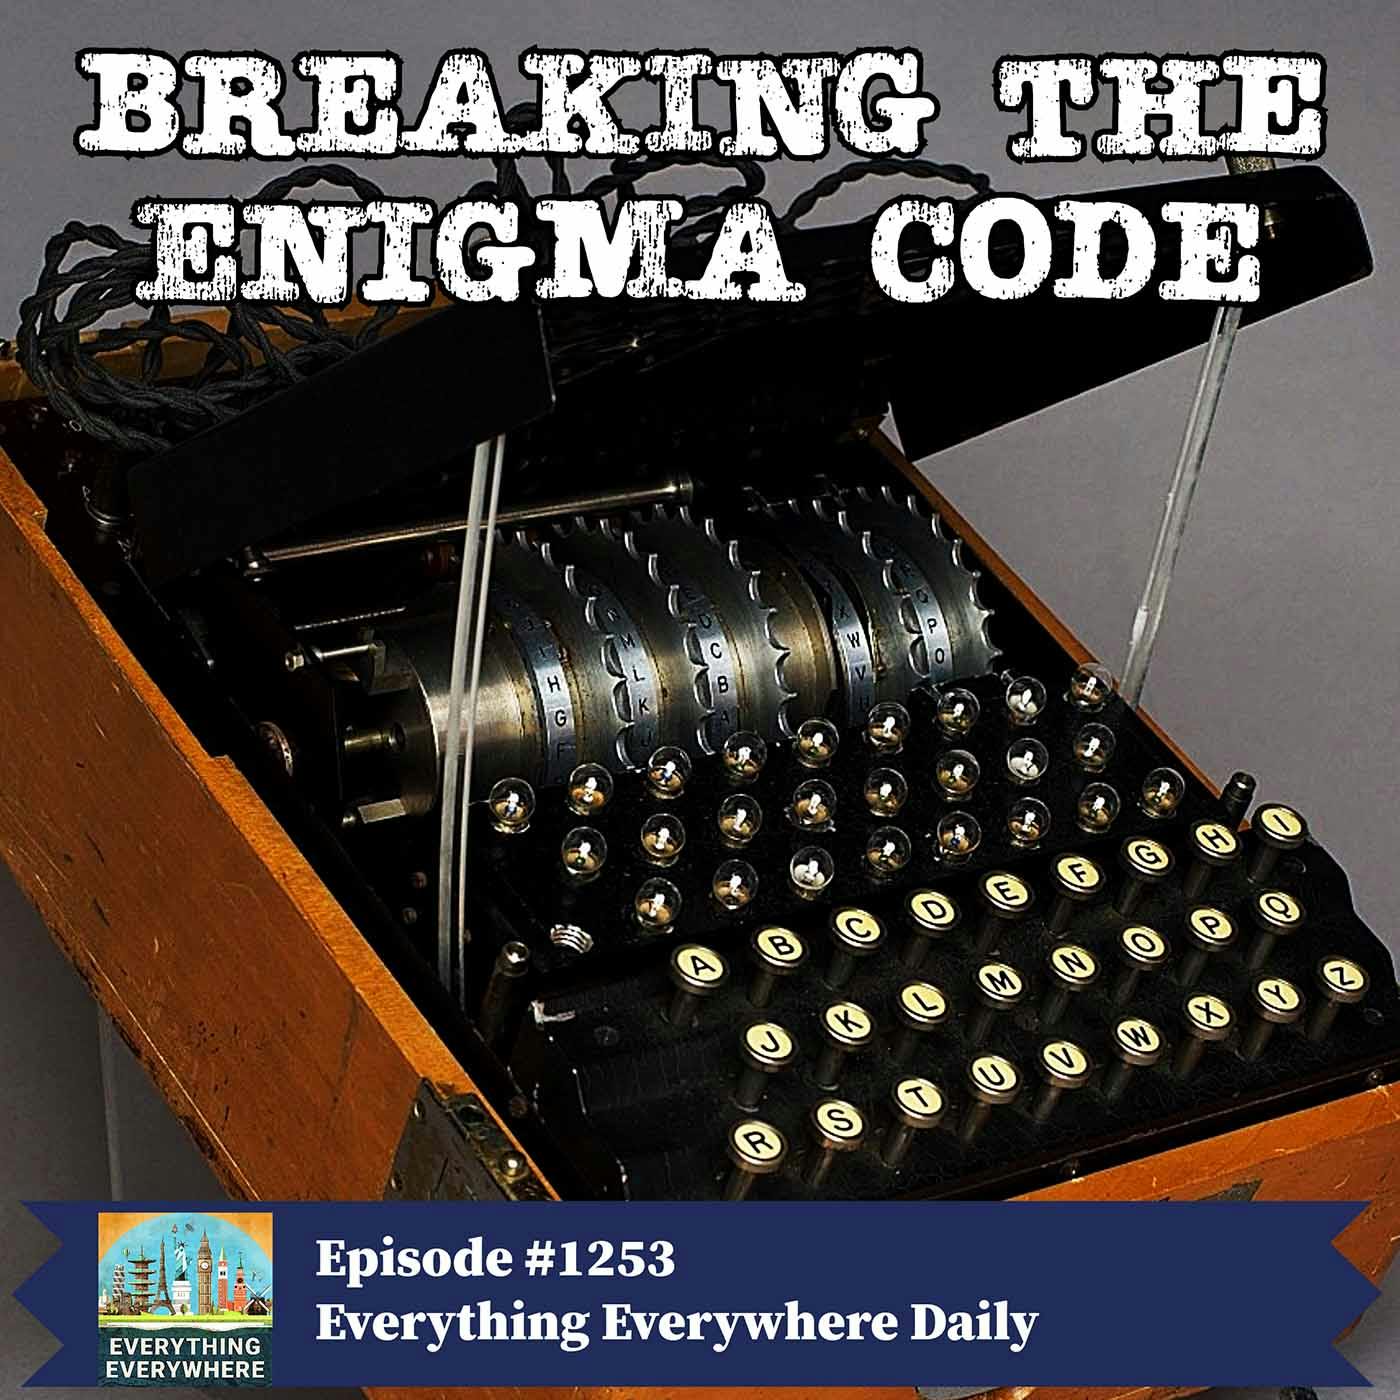 Cracking the Enigma Code